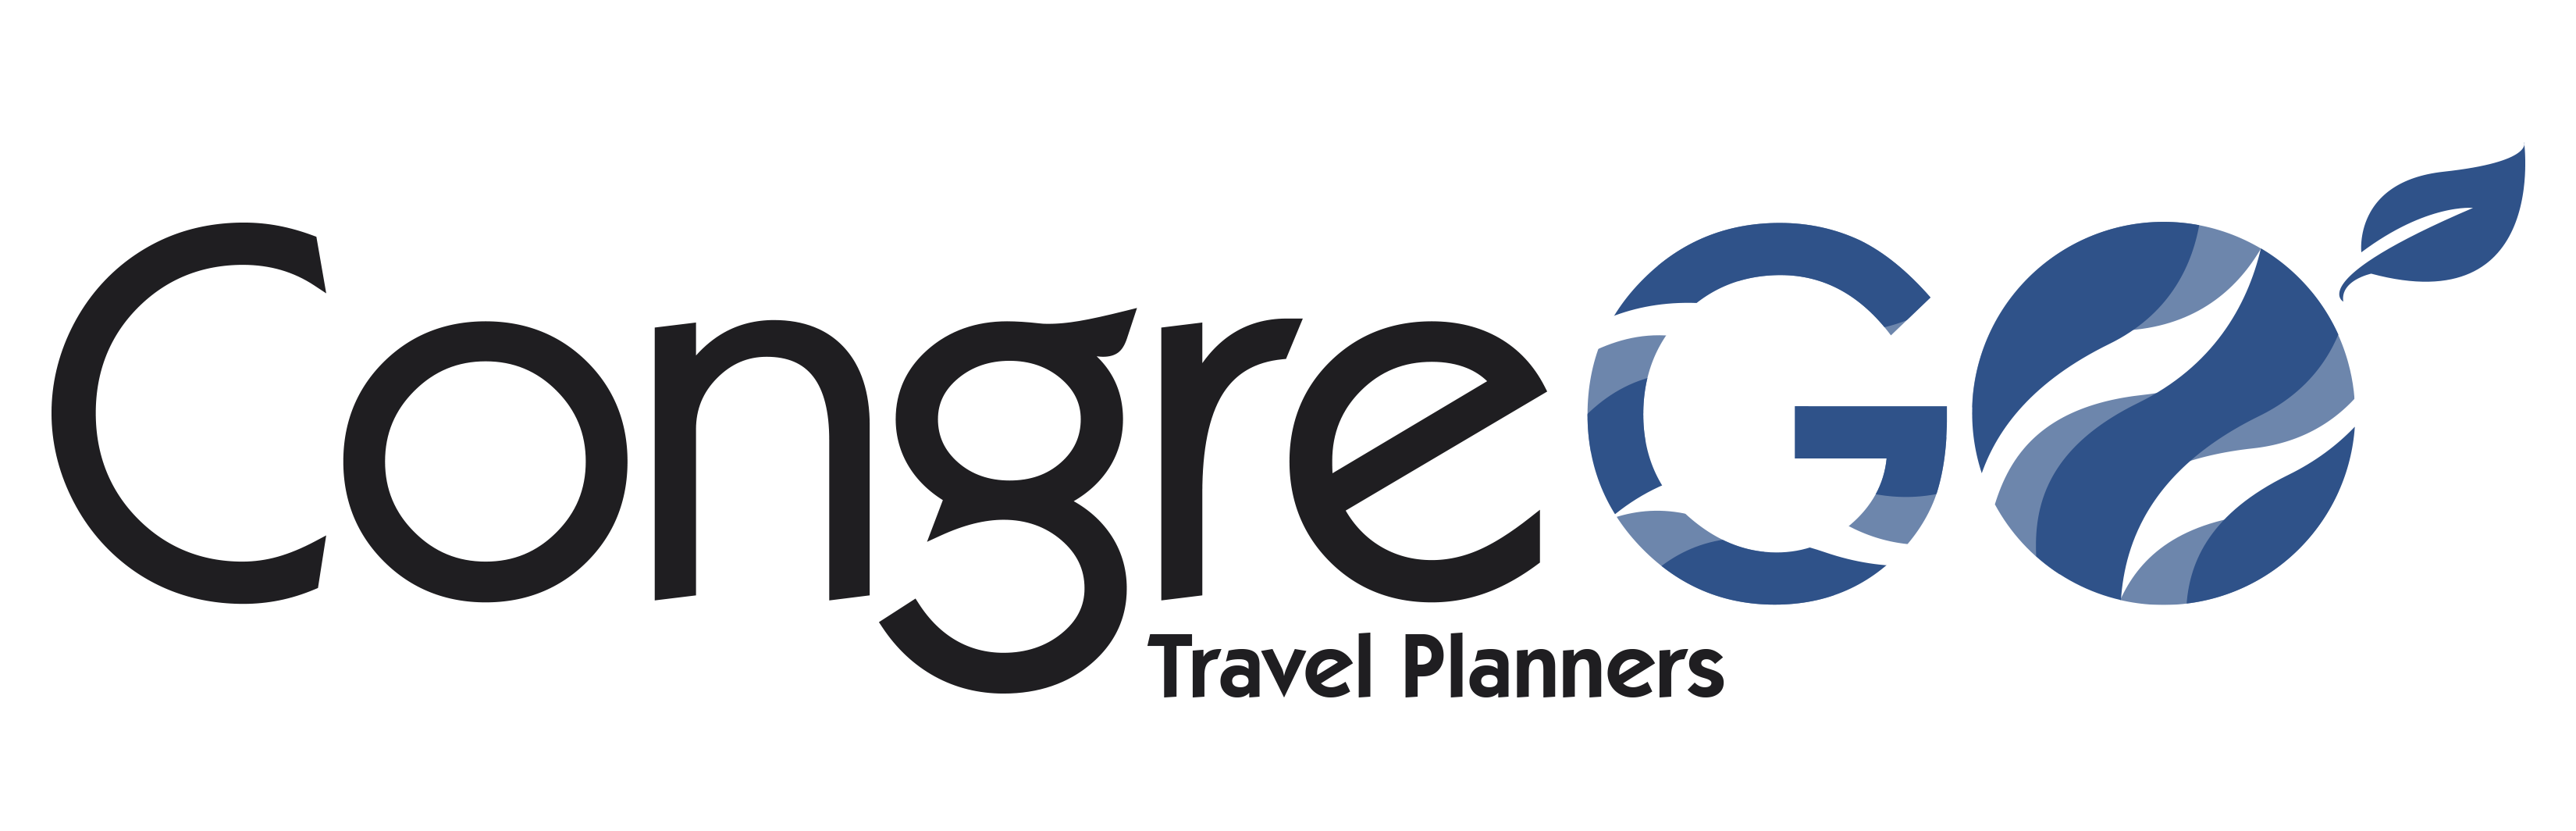 Congrego Travel Planners 